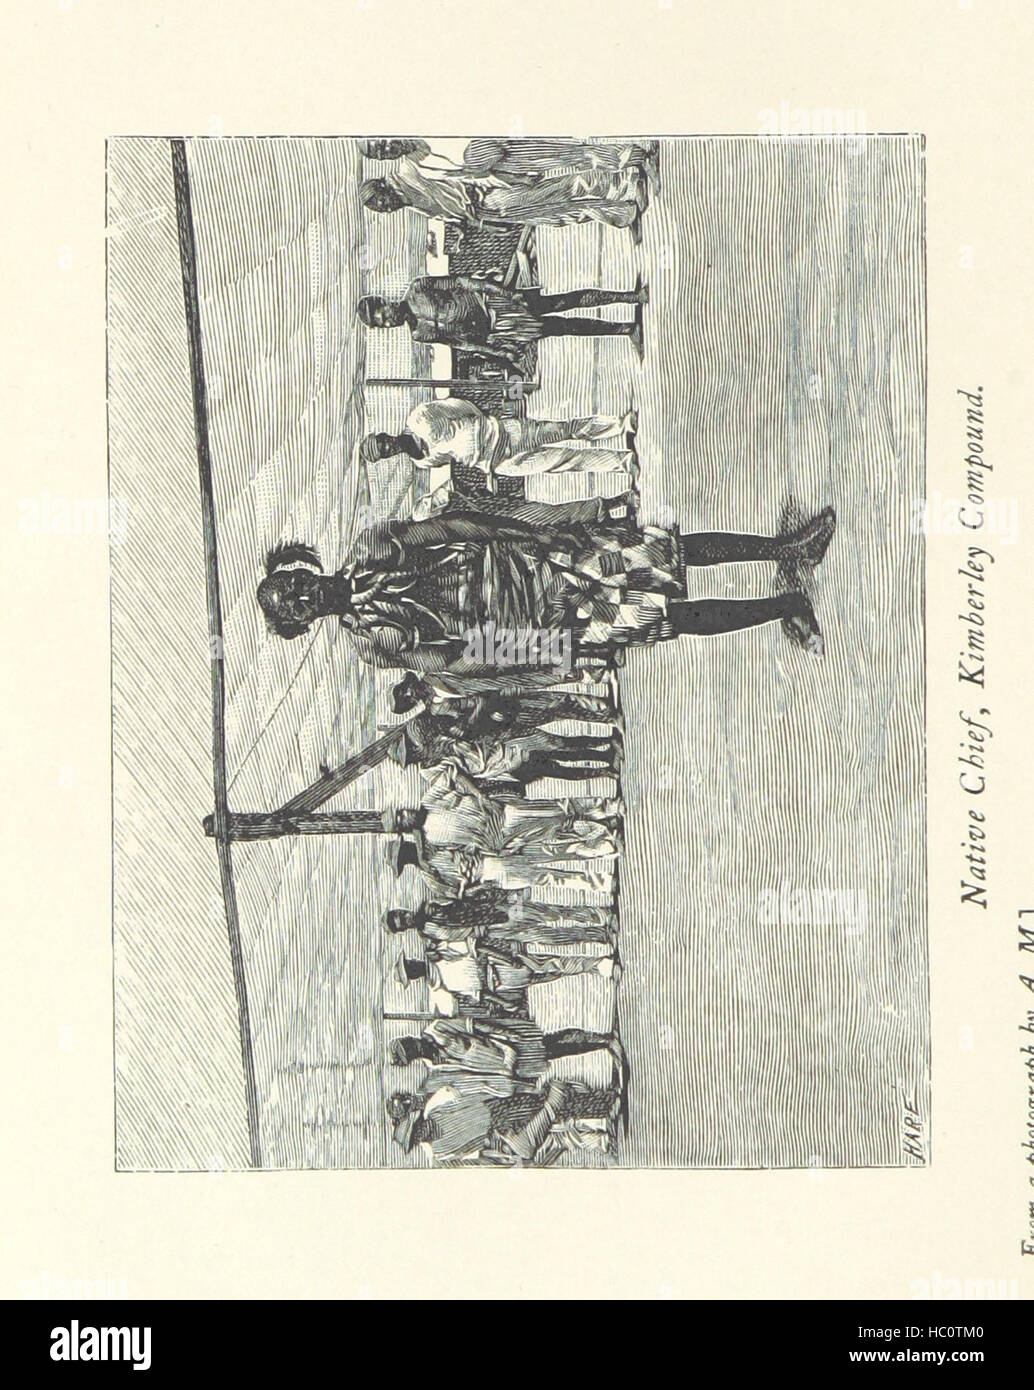 Image taken from page 96 of 'Three Weeks in South Africa. A diary' Image taken from page 96 of 'Three Weeks in South Stock Photo